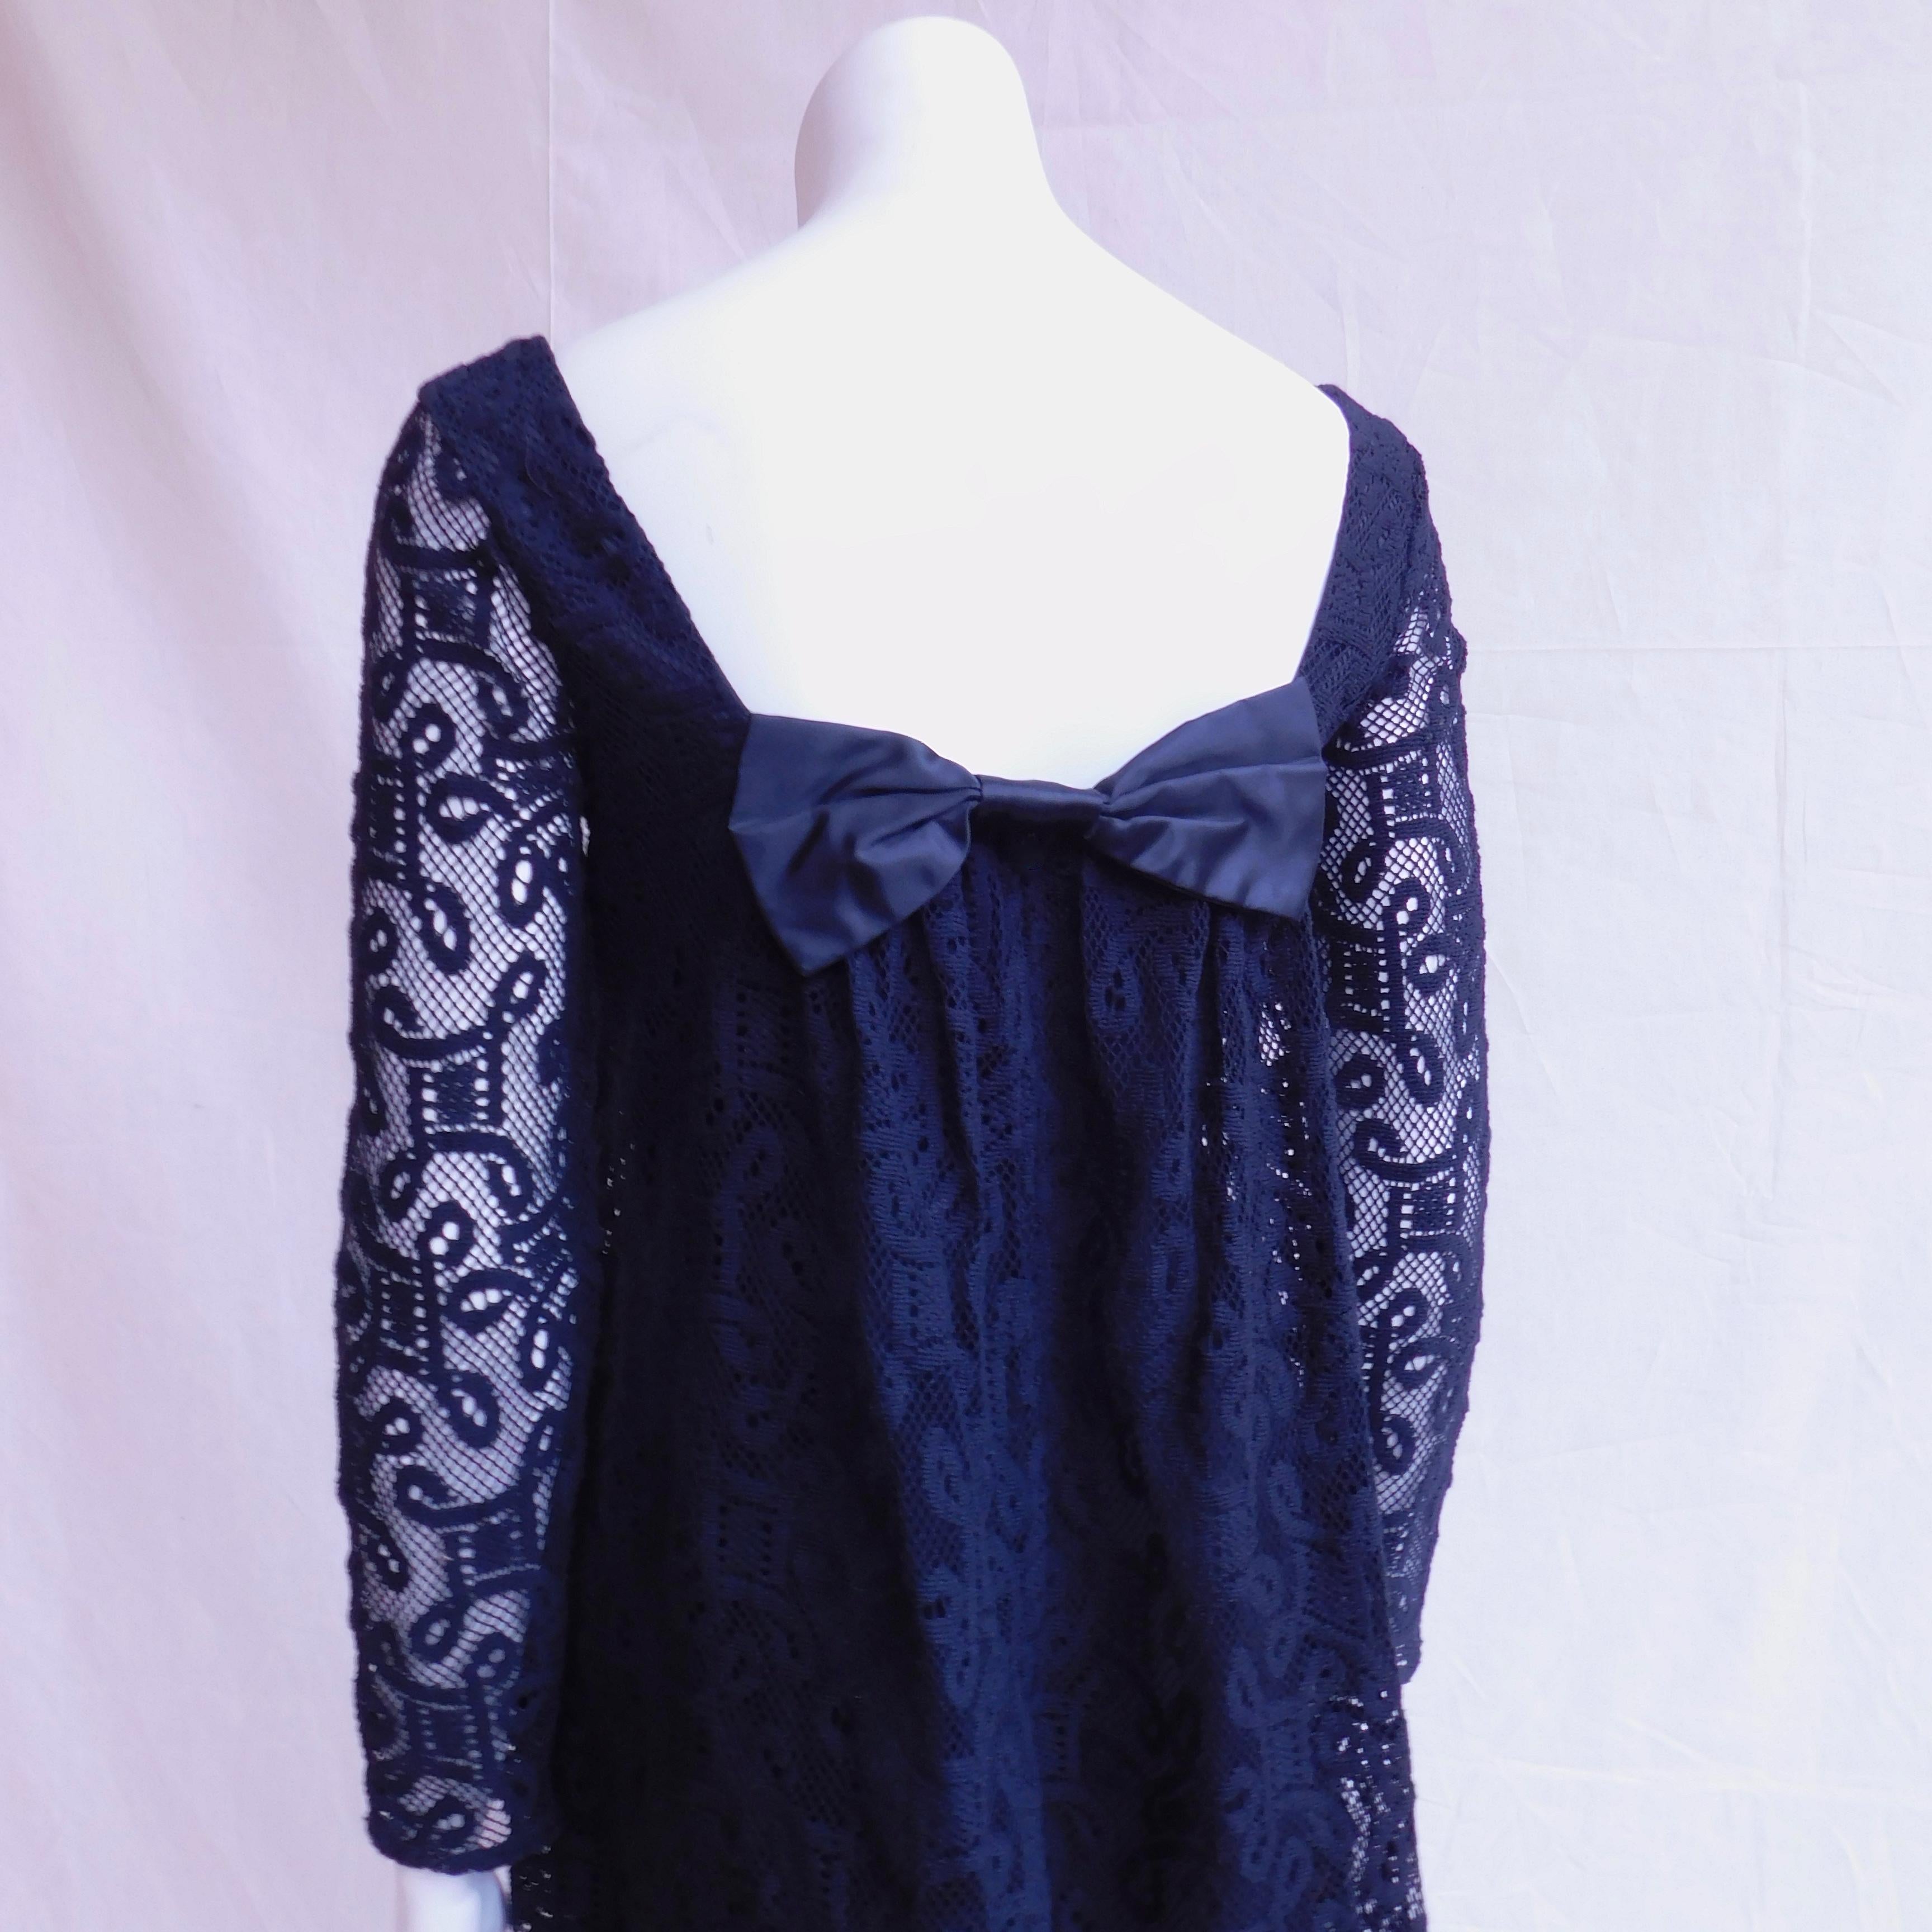 Anna Sui Dress made exclusively for Henri Bendel Chicago . Black cotton lace in an A-line 